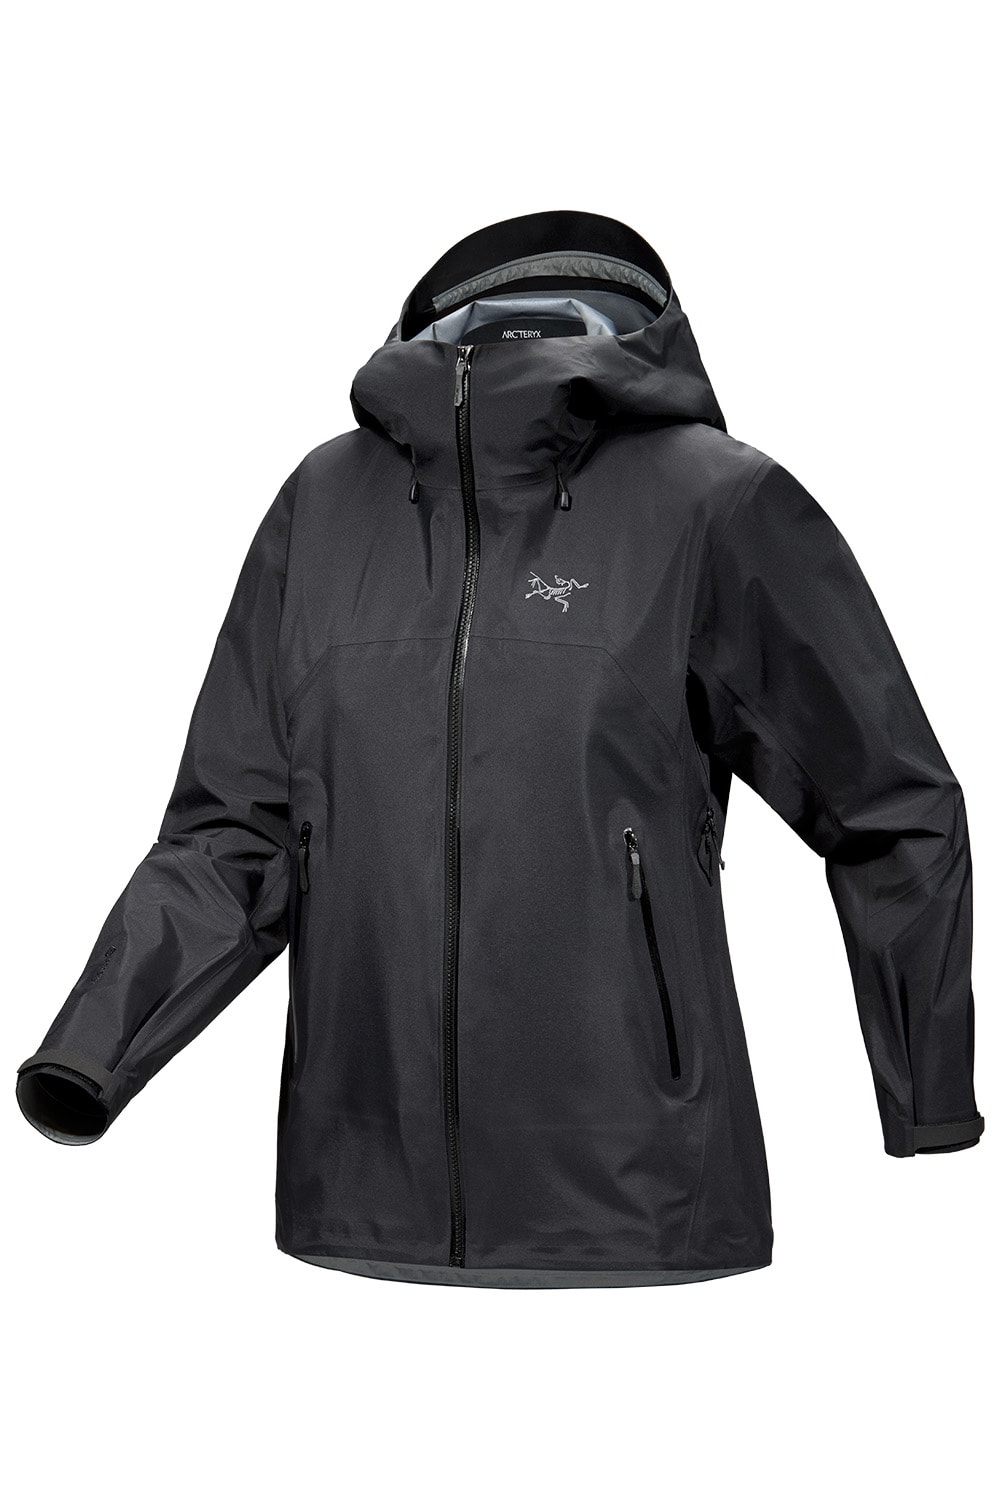 GORE-TEX Reveals New ePE Membrane: Patagonia, Arc'teryx, and More Buy In